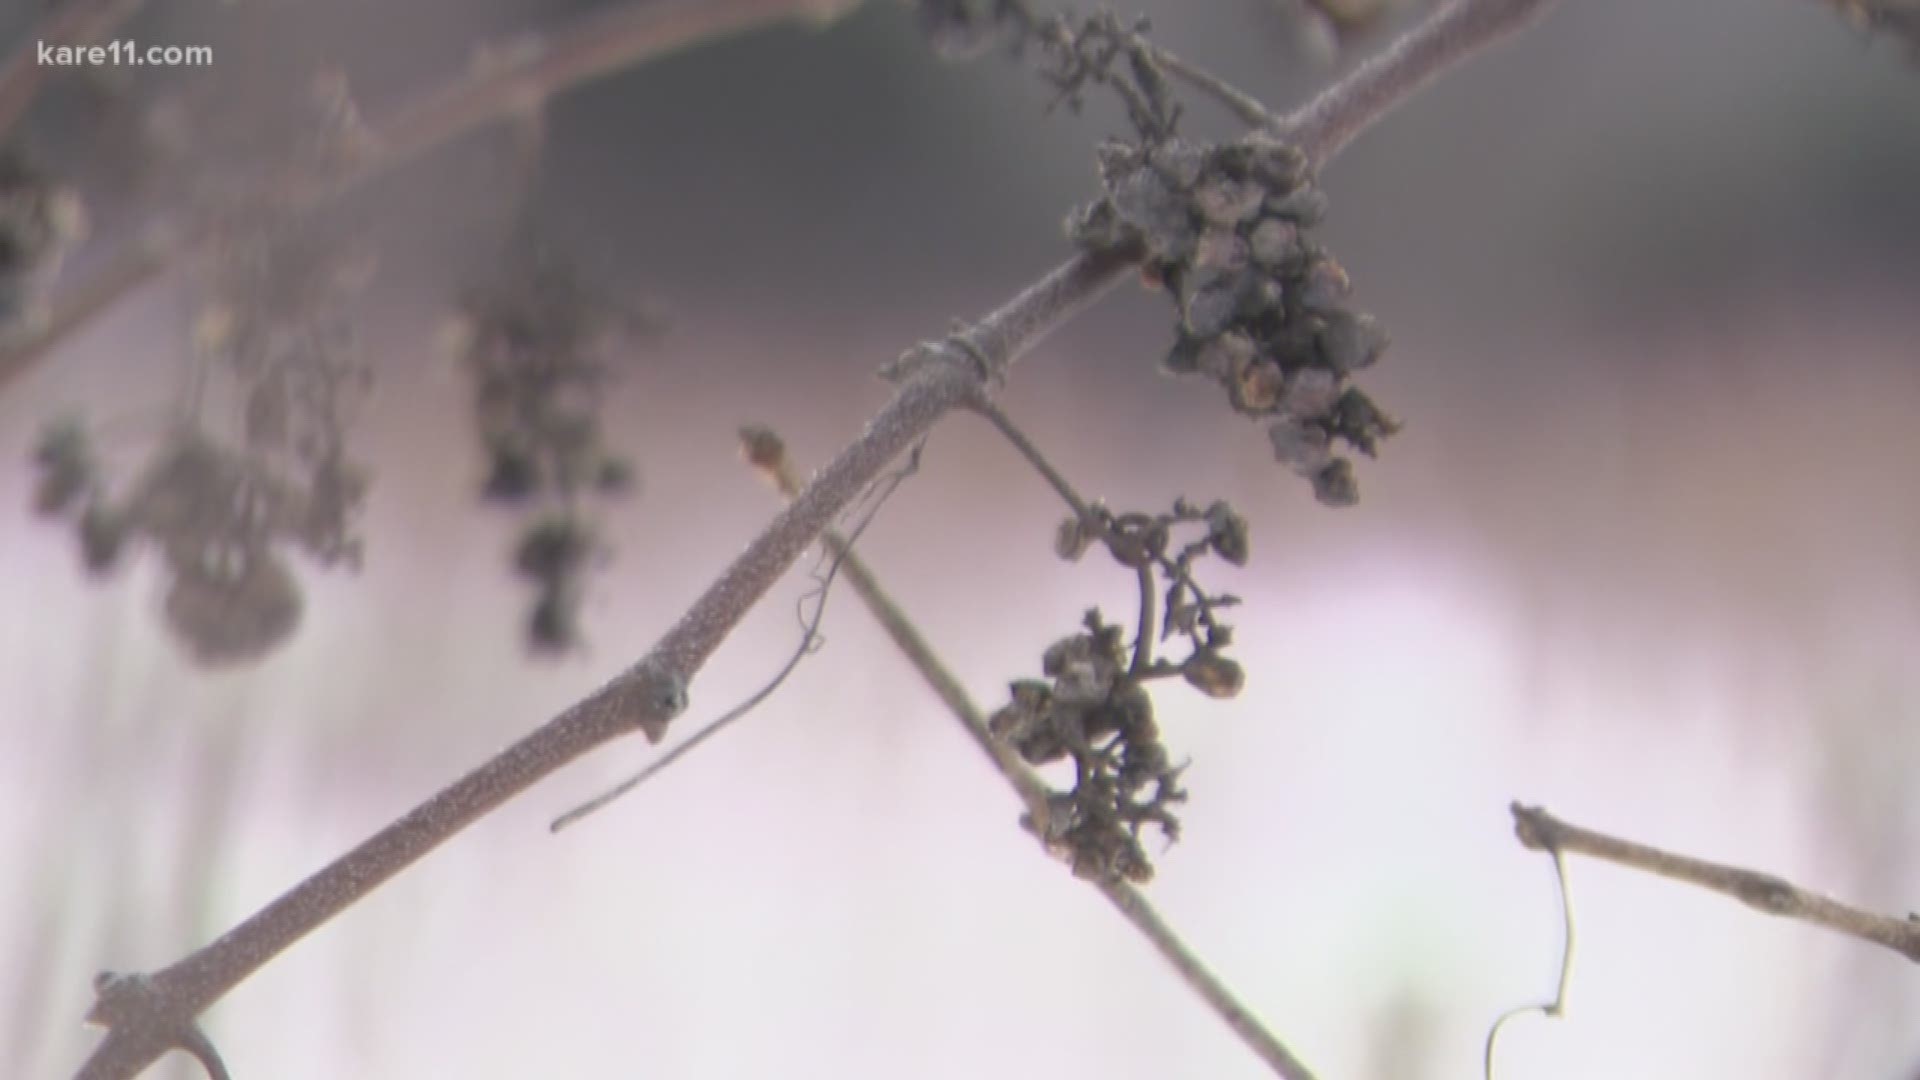 Minnesota wine grapes are designed to survive the cold, but is this cold too much for them?